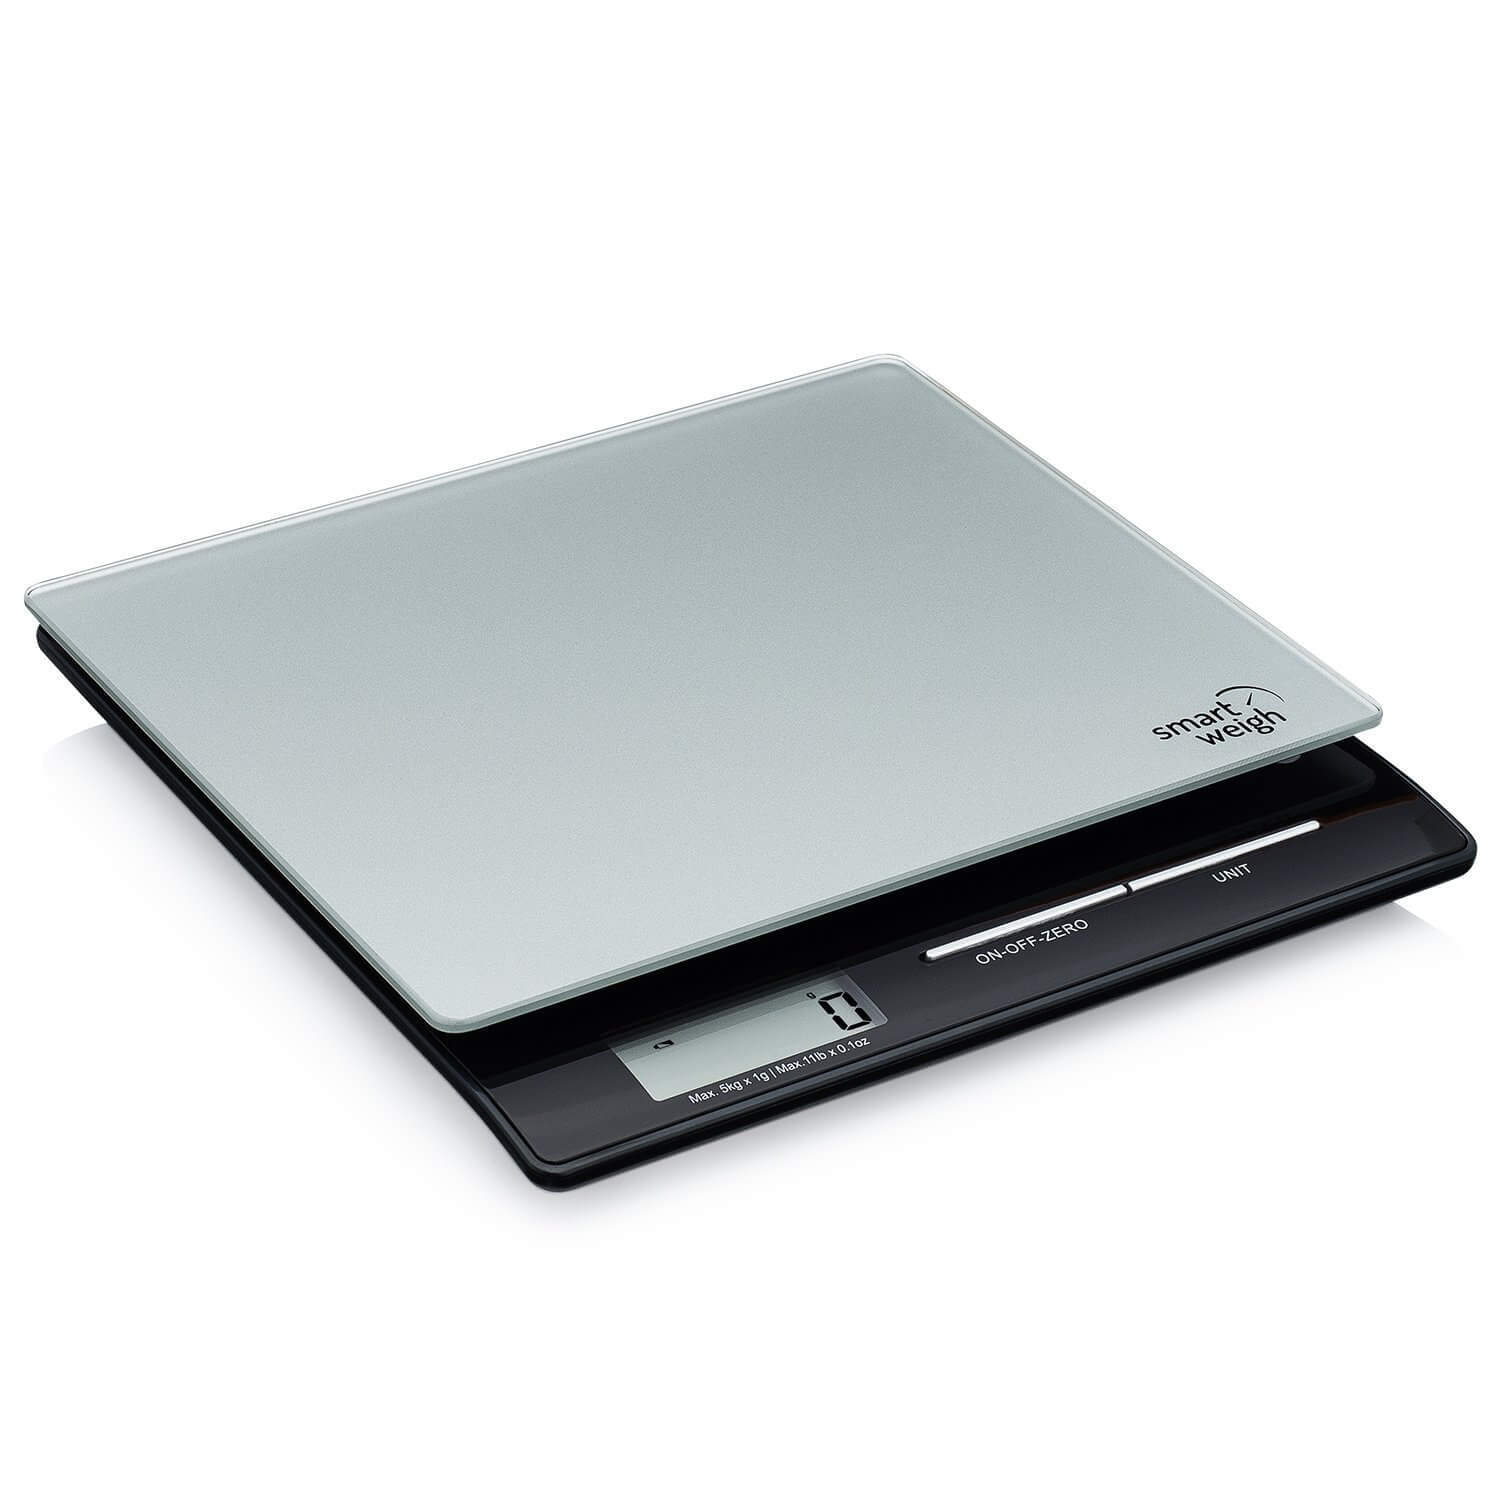 Smart Weigh Professional USPS Postal Scale